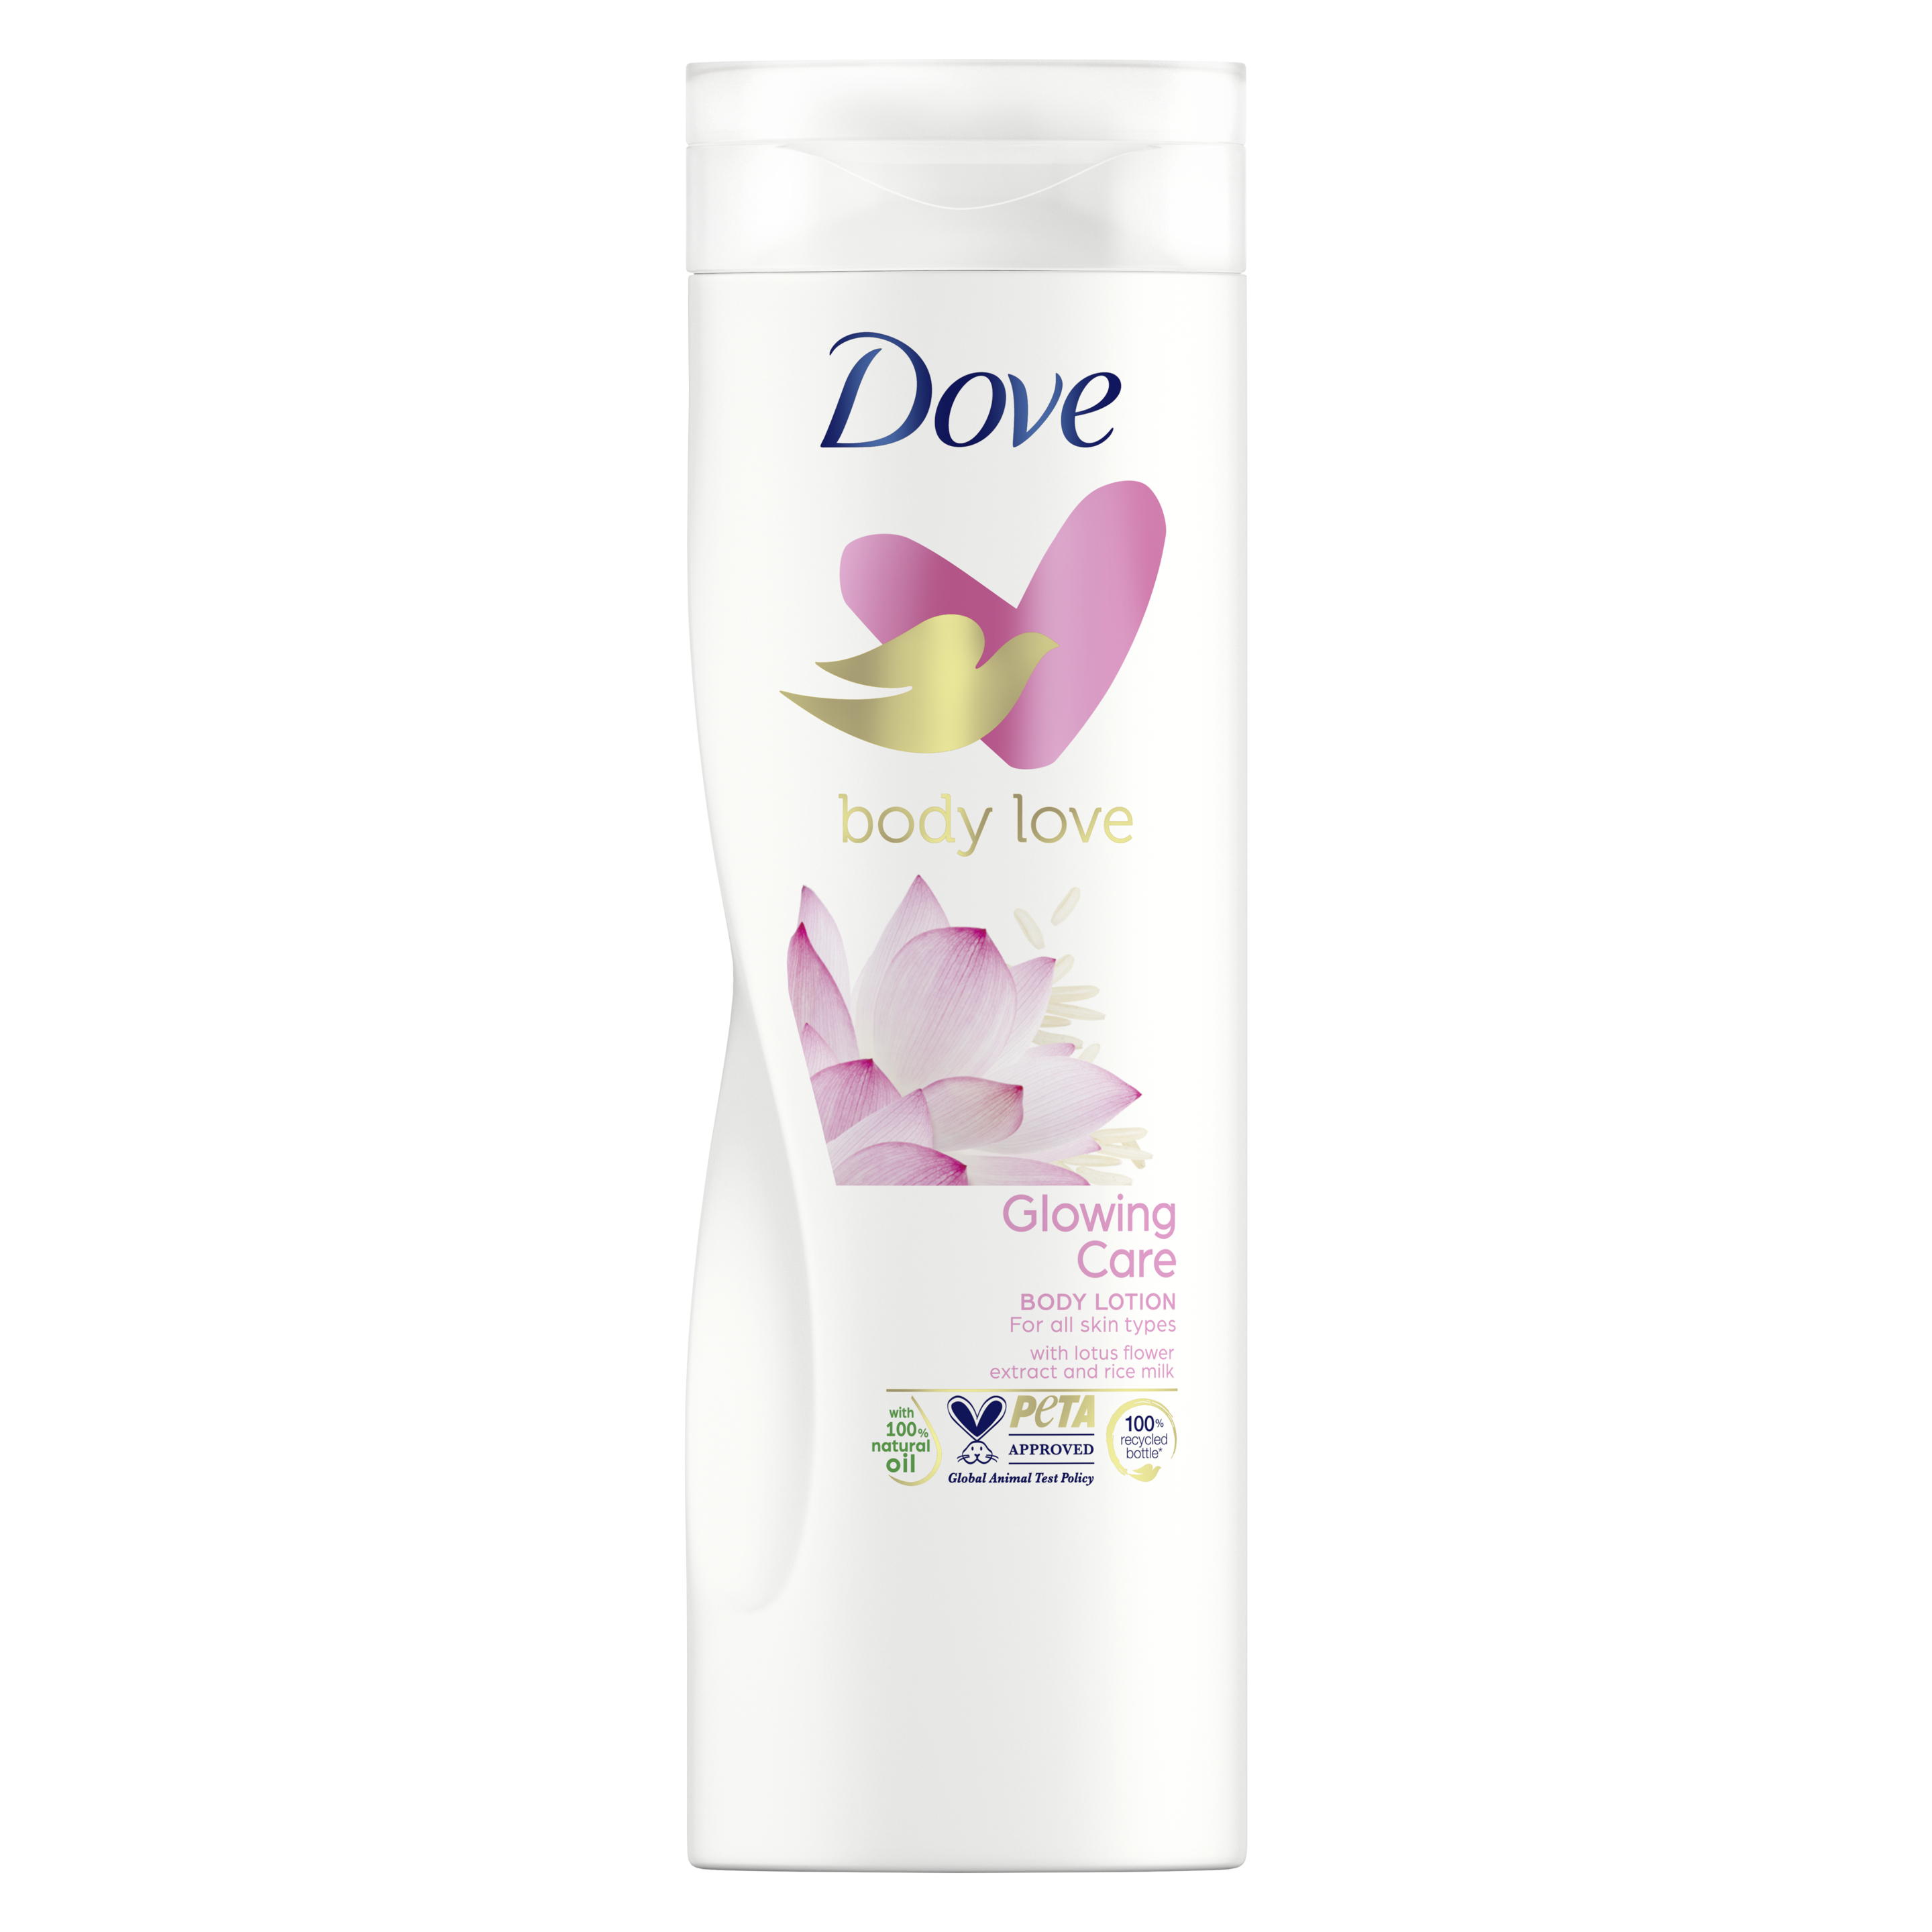 Dove Glowing Lotion 250ml